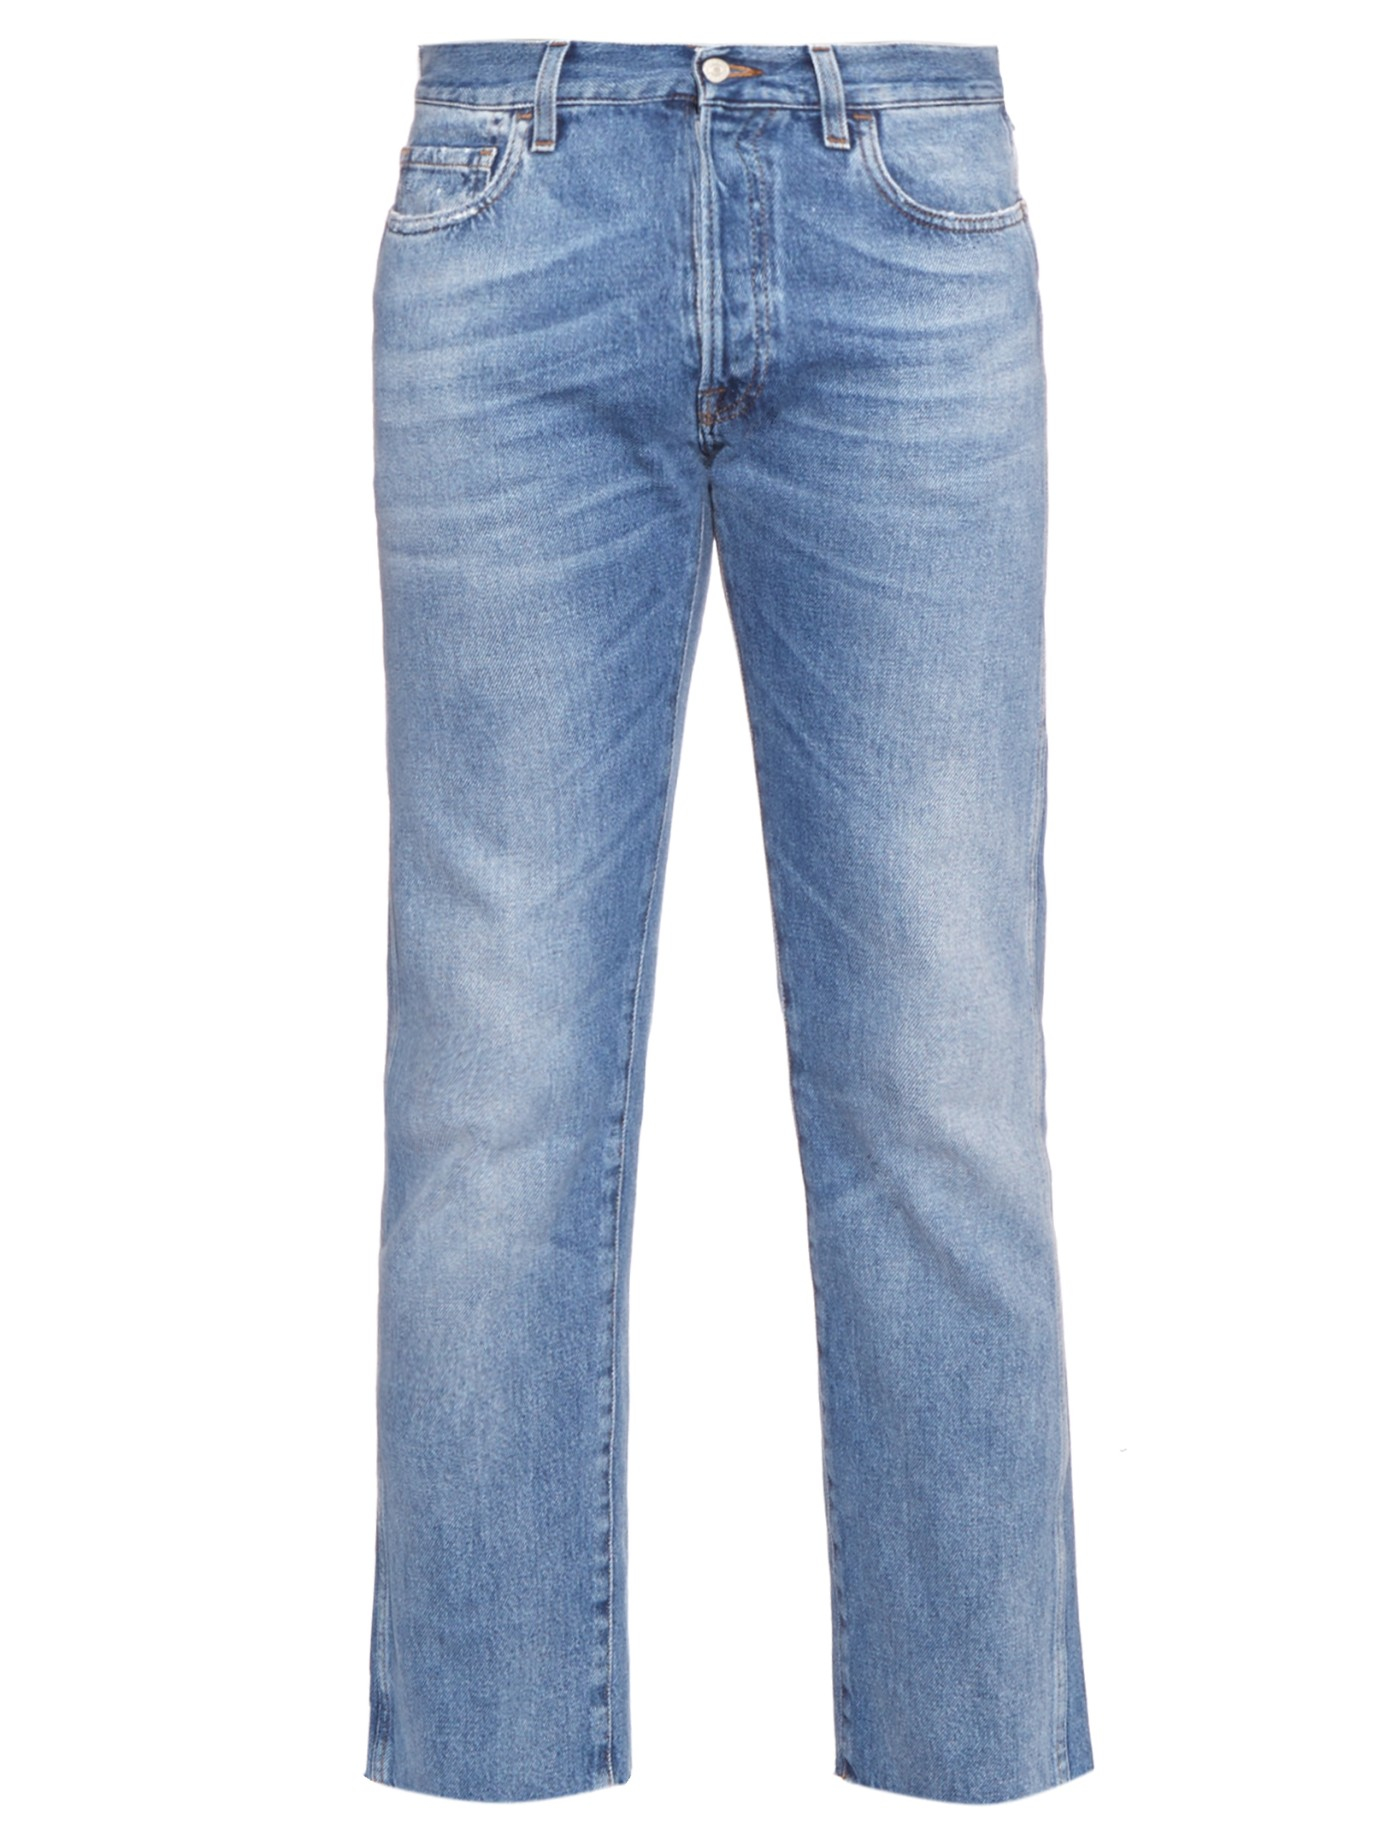 Lyst - Gucci Frayed Cropped Jeans in Blue for Men